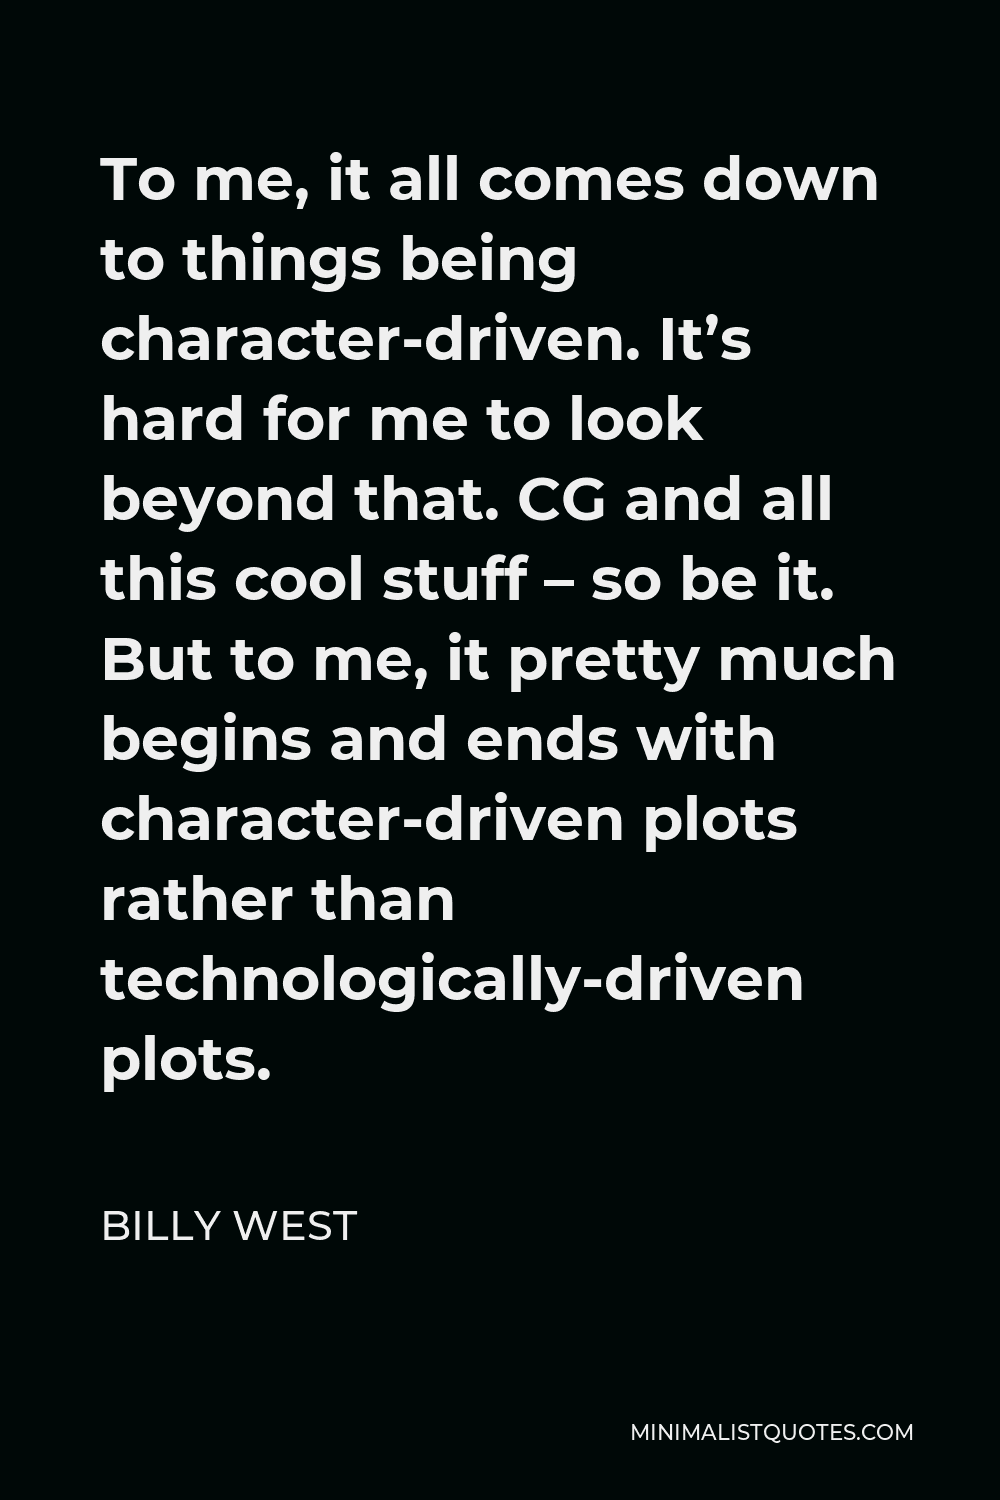 Billy West Quote - To me, it all comes down to things being character-driven. It’s hard for me to look beyond that. CG and all this cool stuff – so be it. But to me, it pretty much begins and ends with character-driven plots rather than technologically-driven plots.